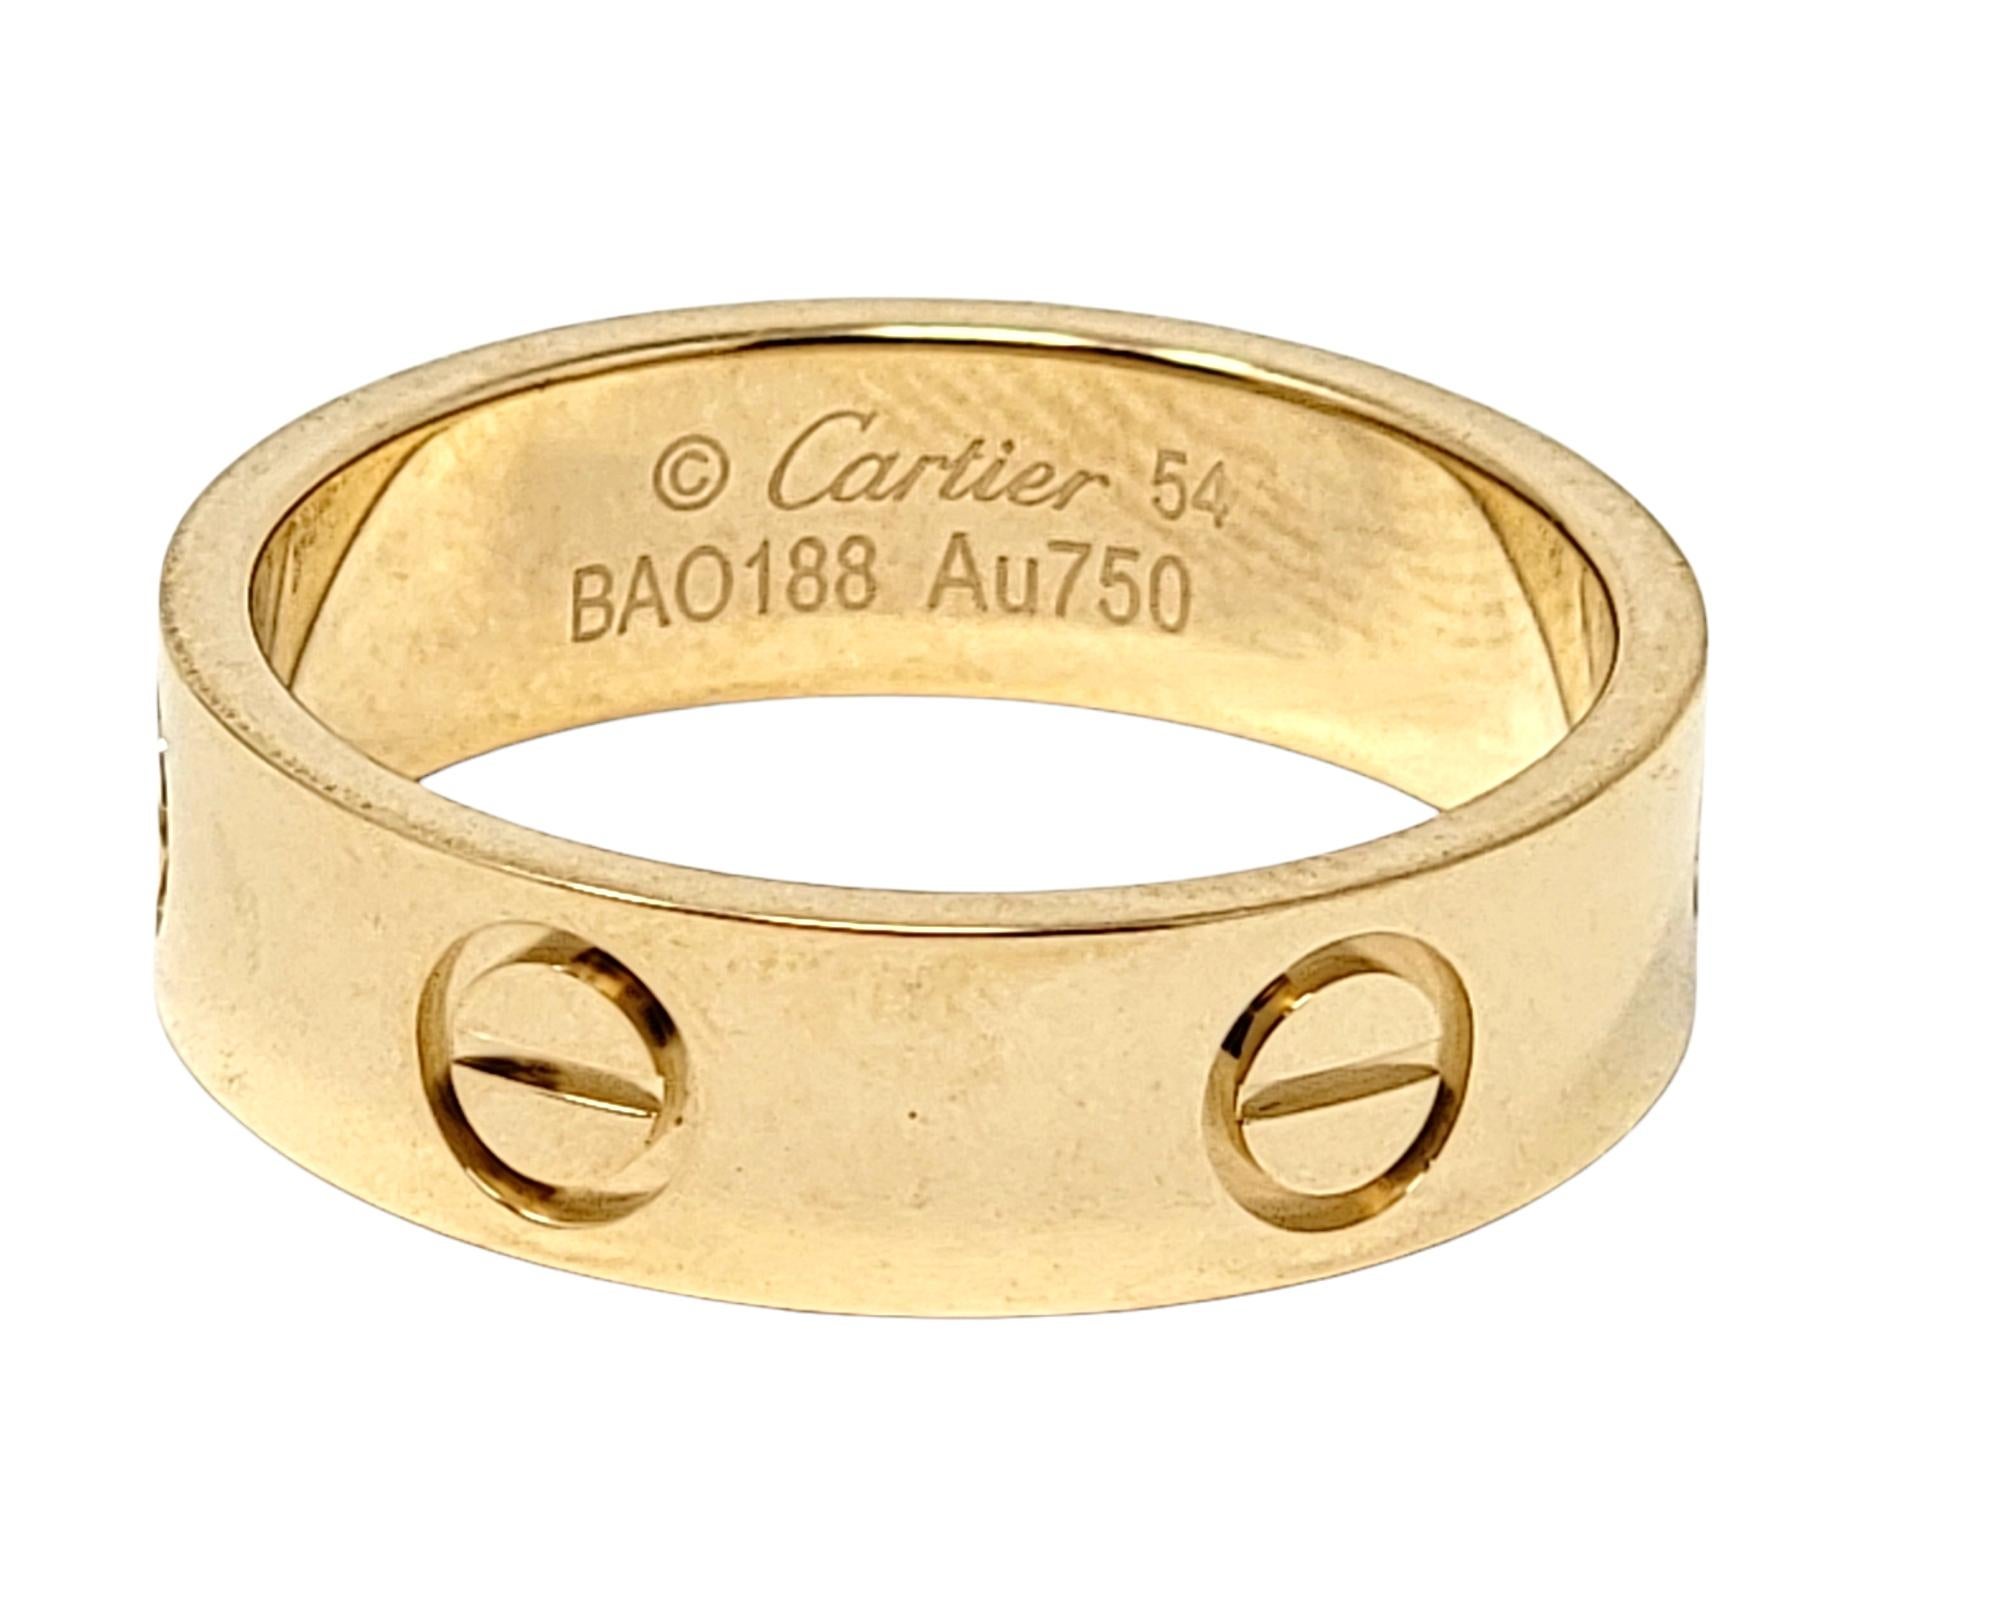 Cartier Love Collection 18 Karat Yellow Gold Band Ring with Box 2